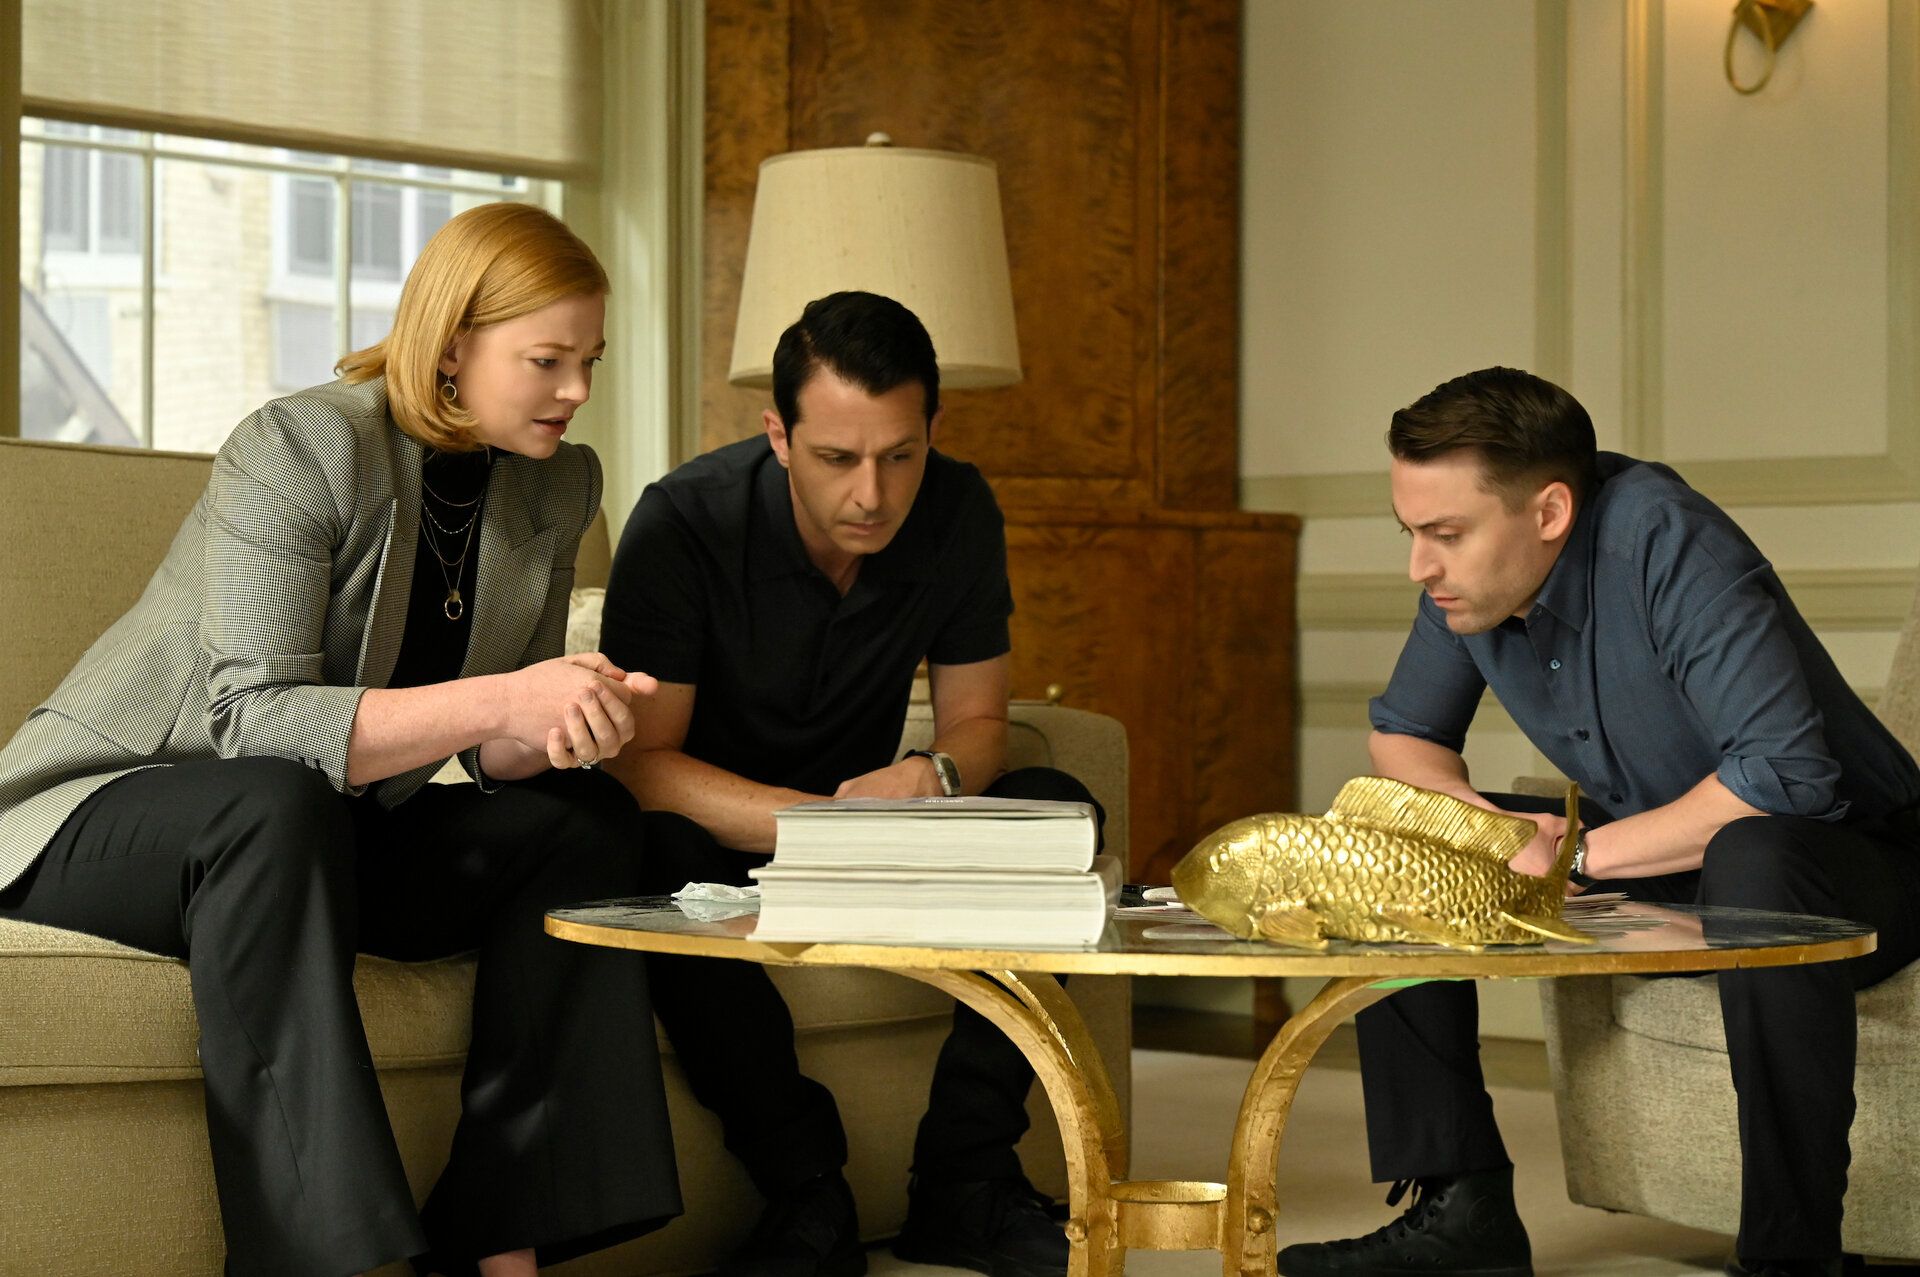 Sarach Snook, Jeremy Strong, and Kieran Culkin peer over a coffee table in 'Succession' season 4, episode 4.